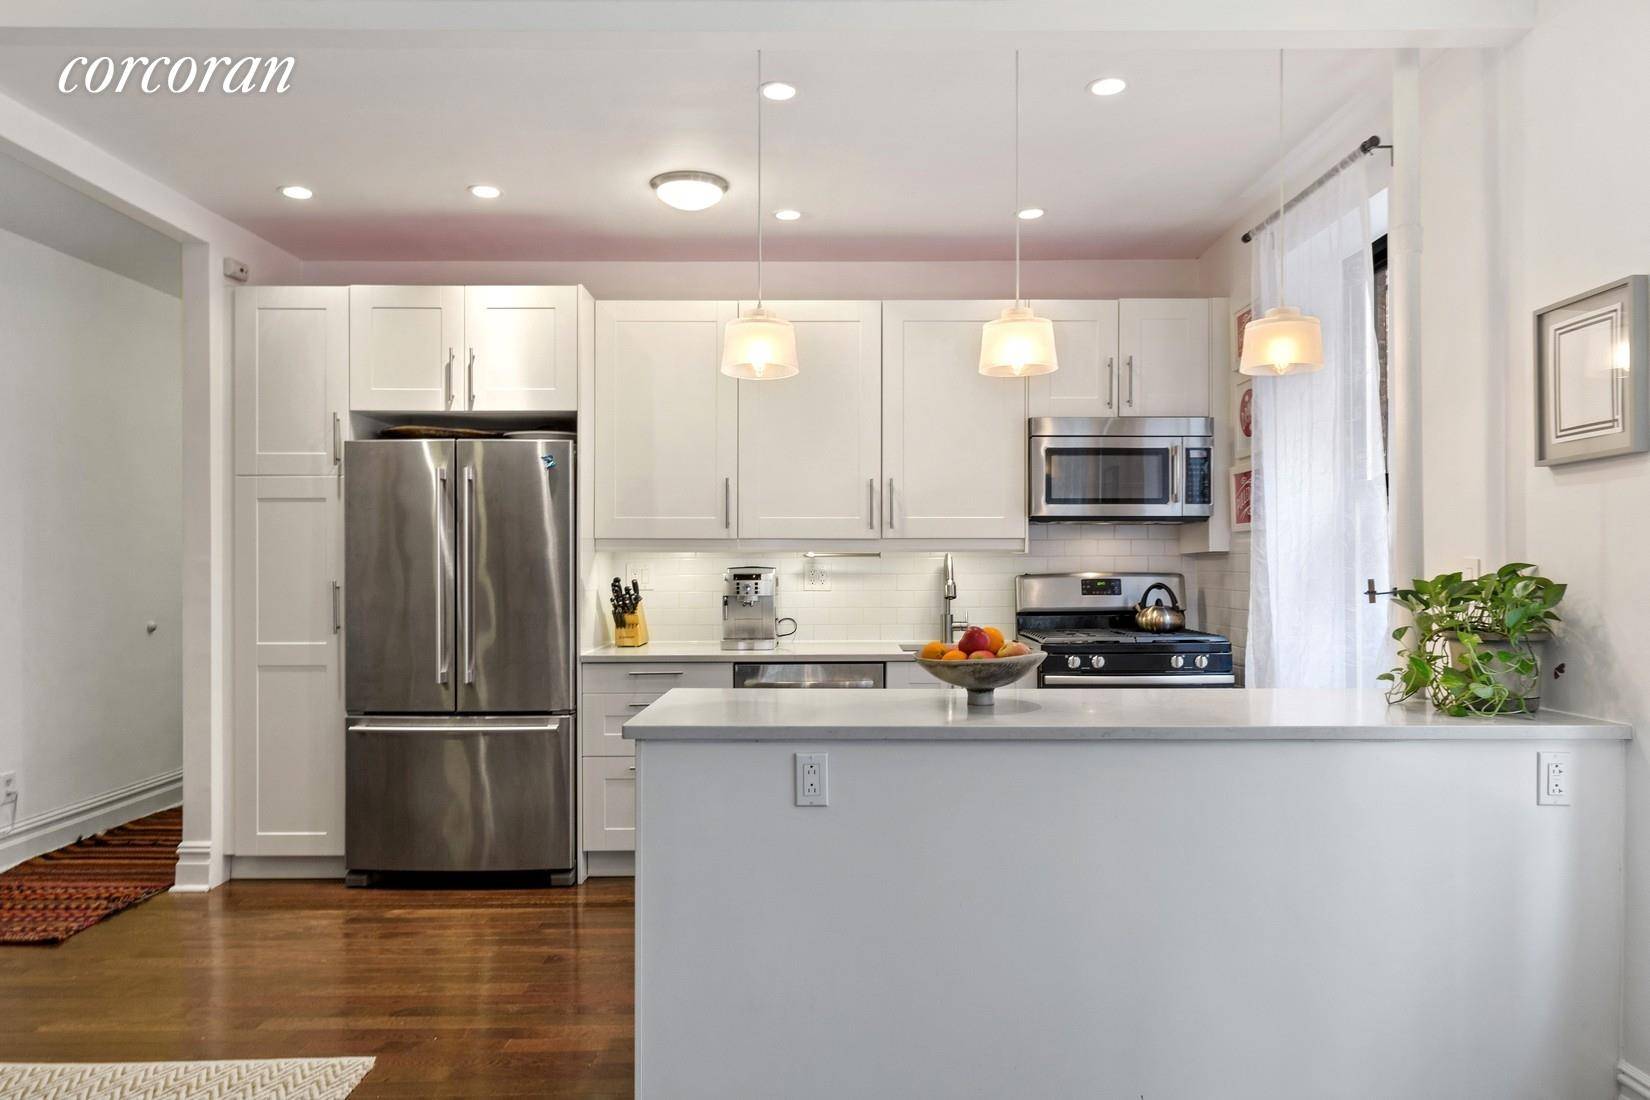 This beautifully renovated two bedroom Prospect Heights apartment wastes not an inch of space, with a perfect split bedroom layout, modern design, and pre war charm.